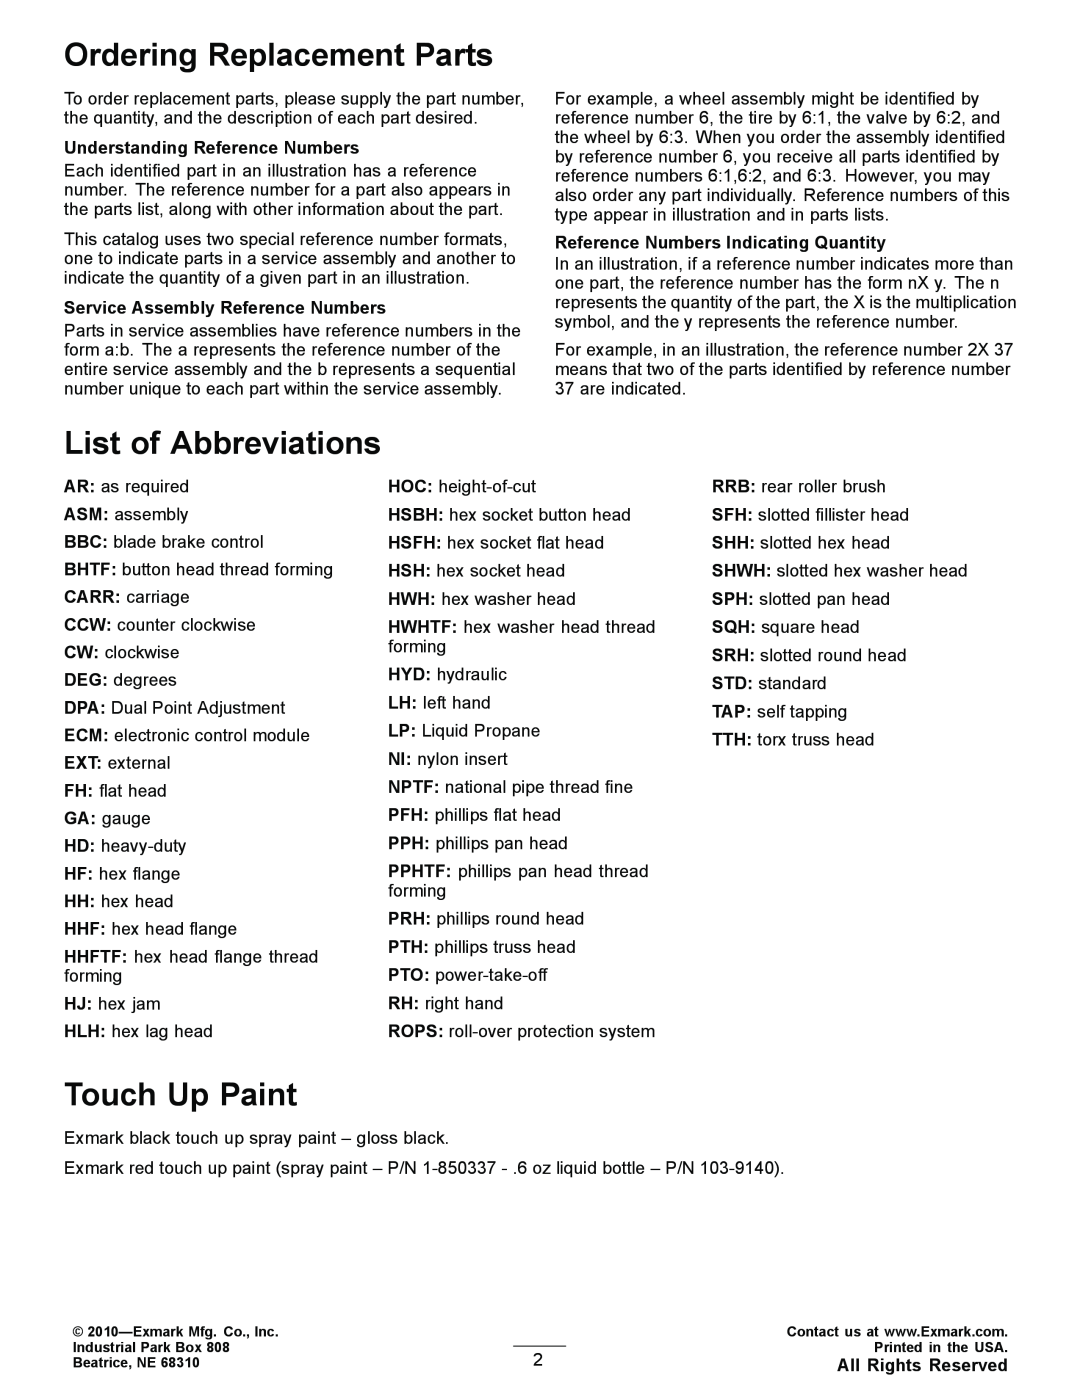 Exmark 4500-764 Rev.A Ordering Replacement Parts, List of Abbreviations, Touch Up Paint, Understanding Reference Numbers 